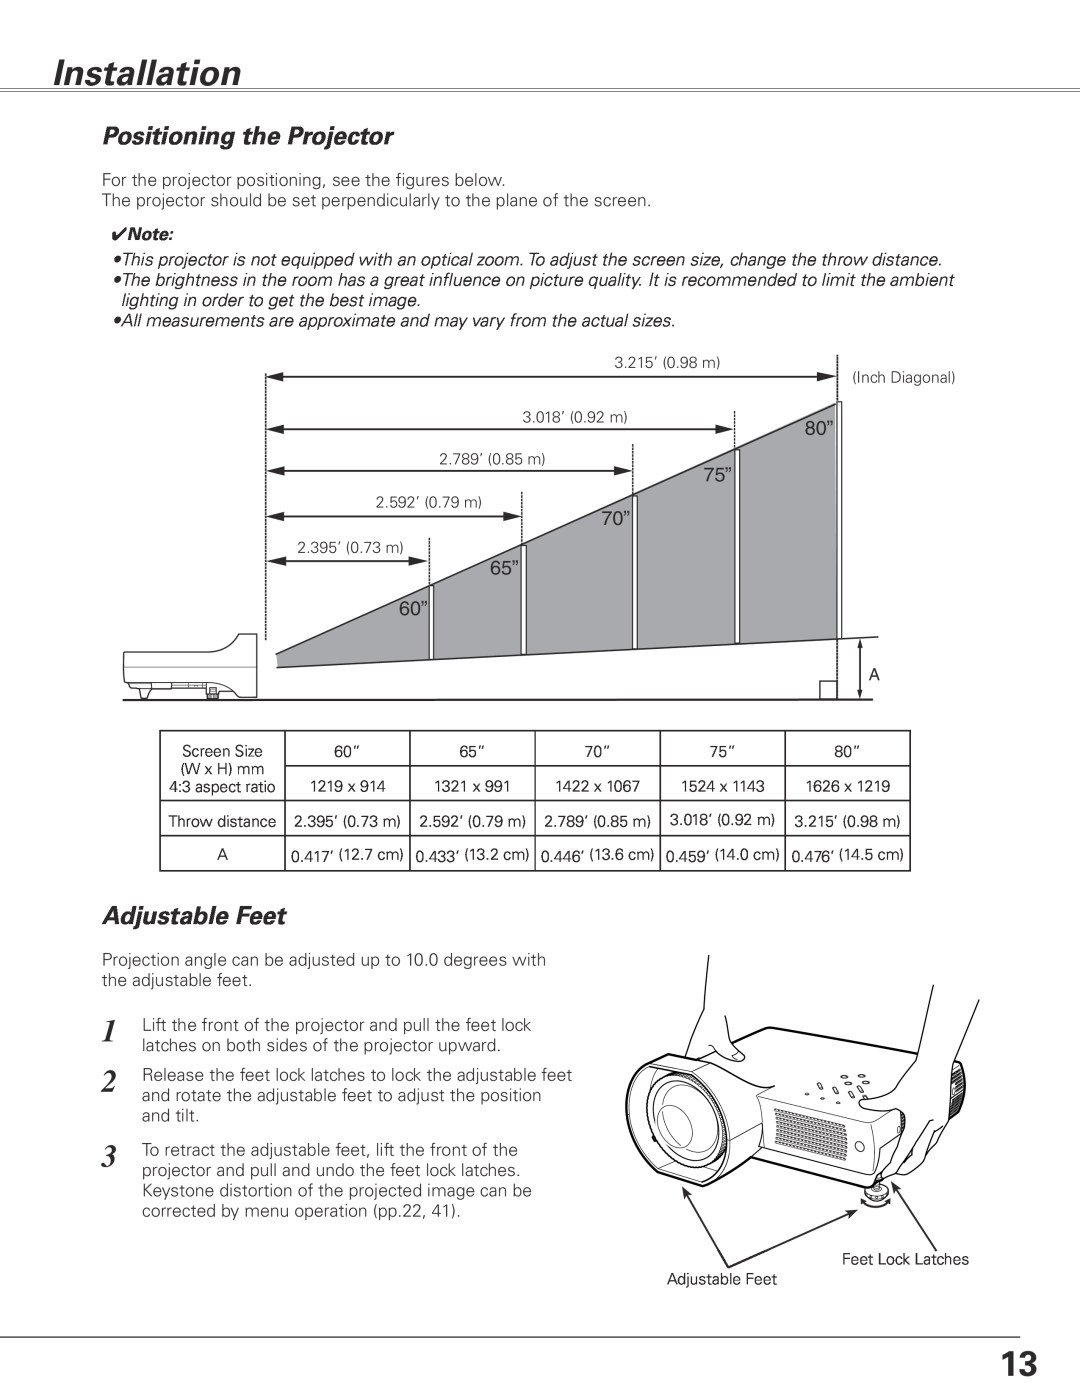 Sanyo PLC-XL45 owner manual Installation, Positioning the Projector, Adjustable Feet 